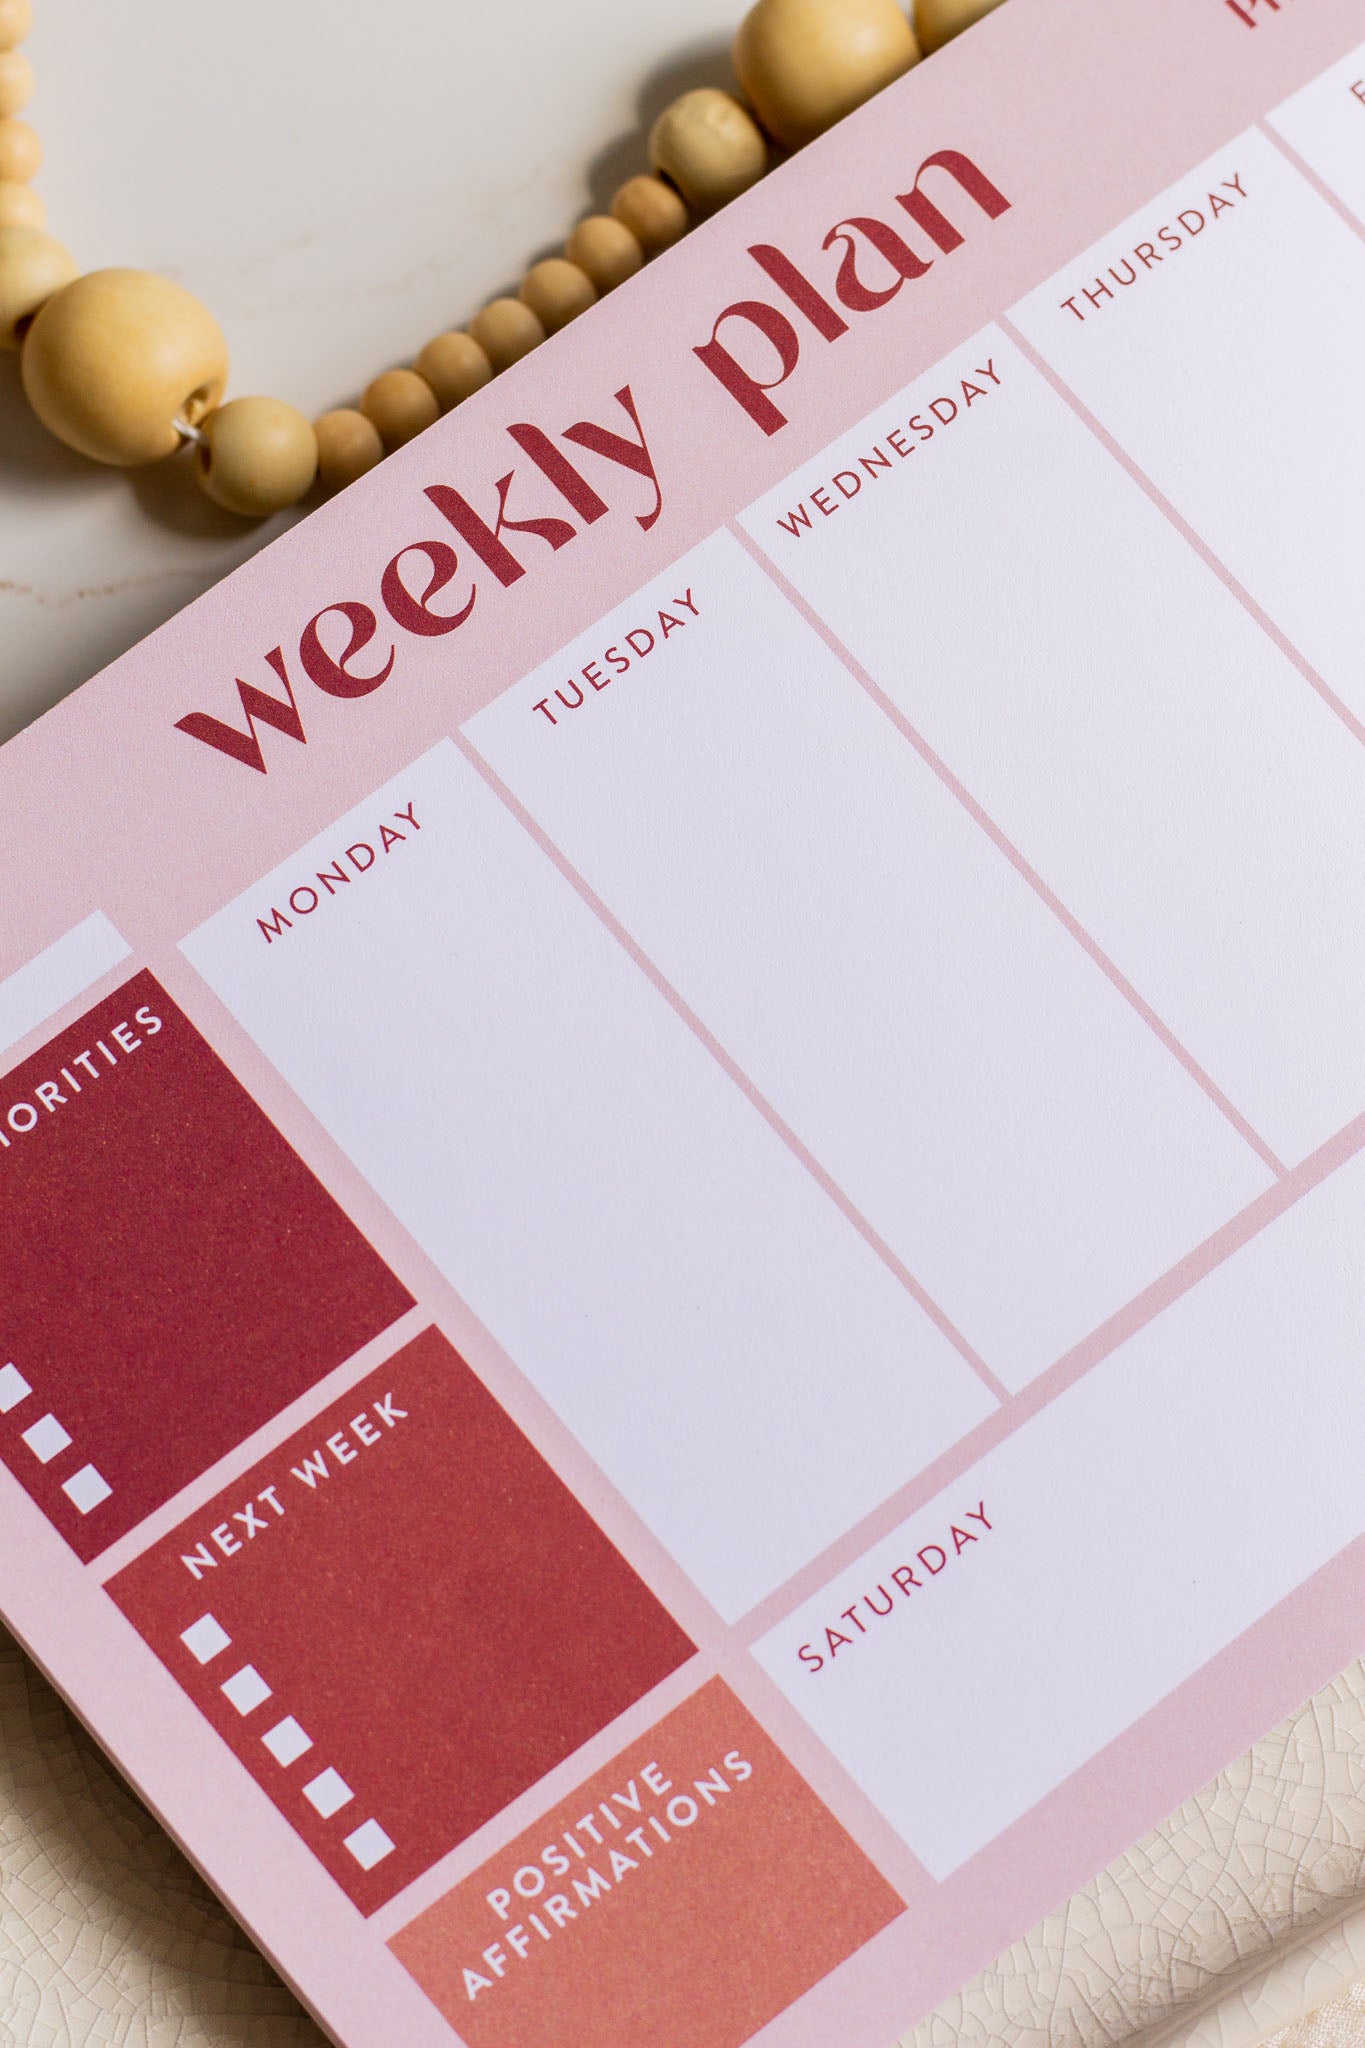 Weekly Plan Notepad laying on a decorative tray